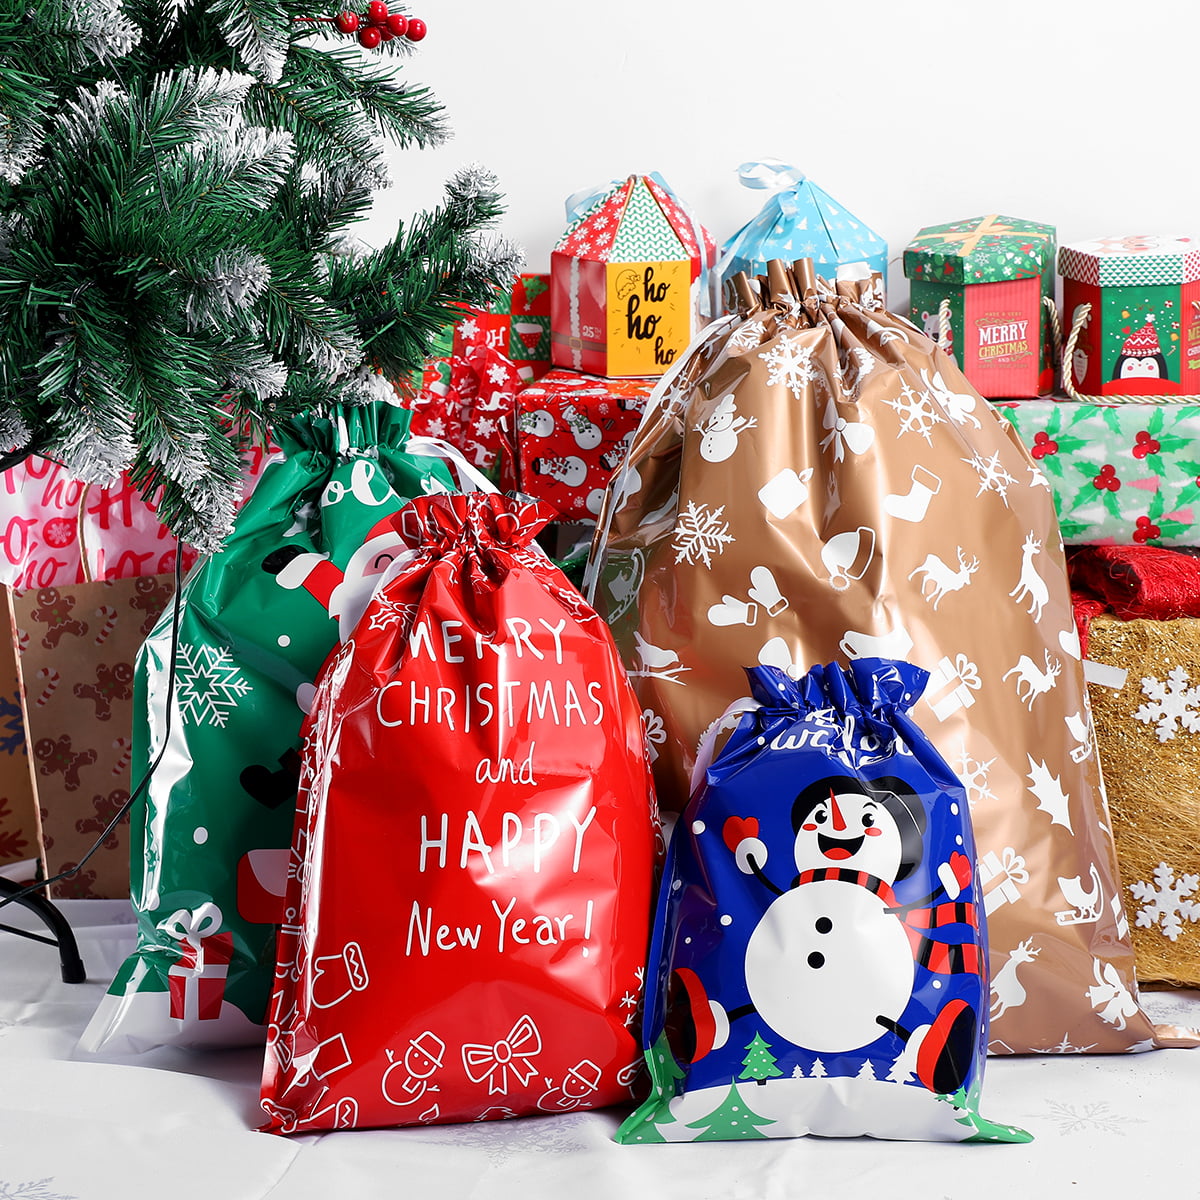 OUSCENE 31 PCS Christmas Gift Bags Drawstring Gift Bag Assorted Christmas Wrapping Bag Plastic Candy Treat Bags with Ribbon Tie for Xmas Snack Cookie Goodie Decoration Party Holiday Kids Presents 